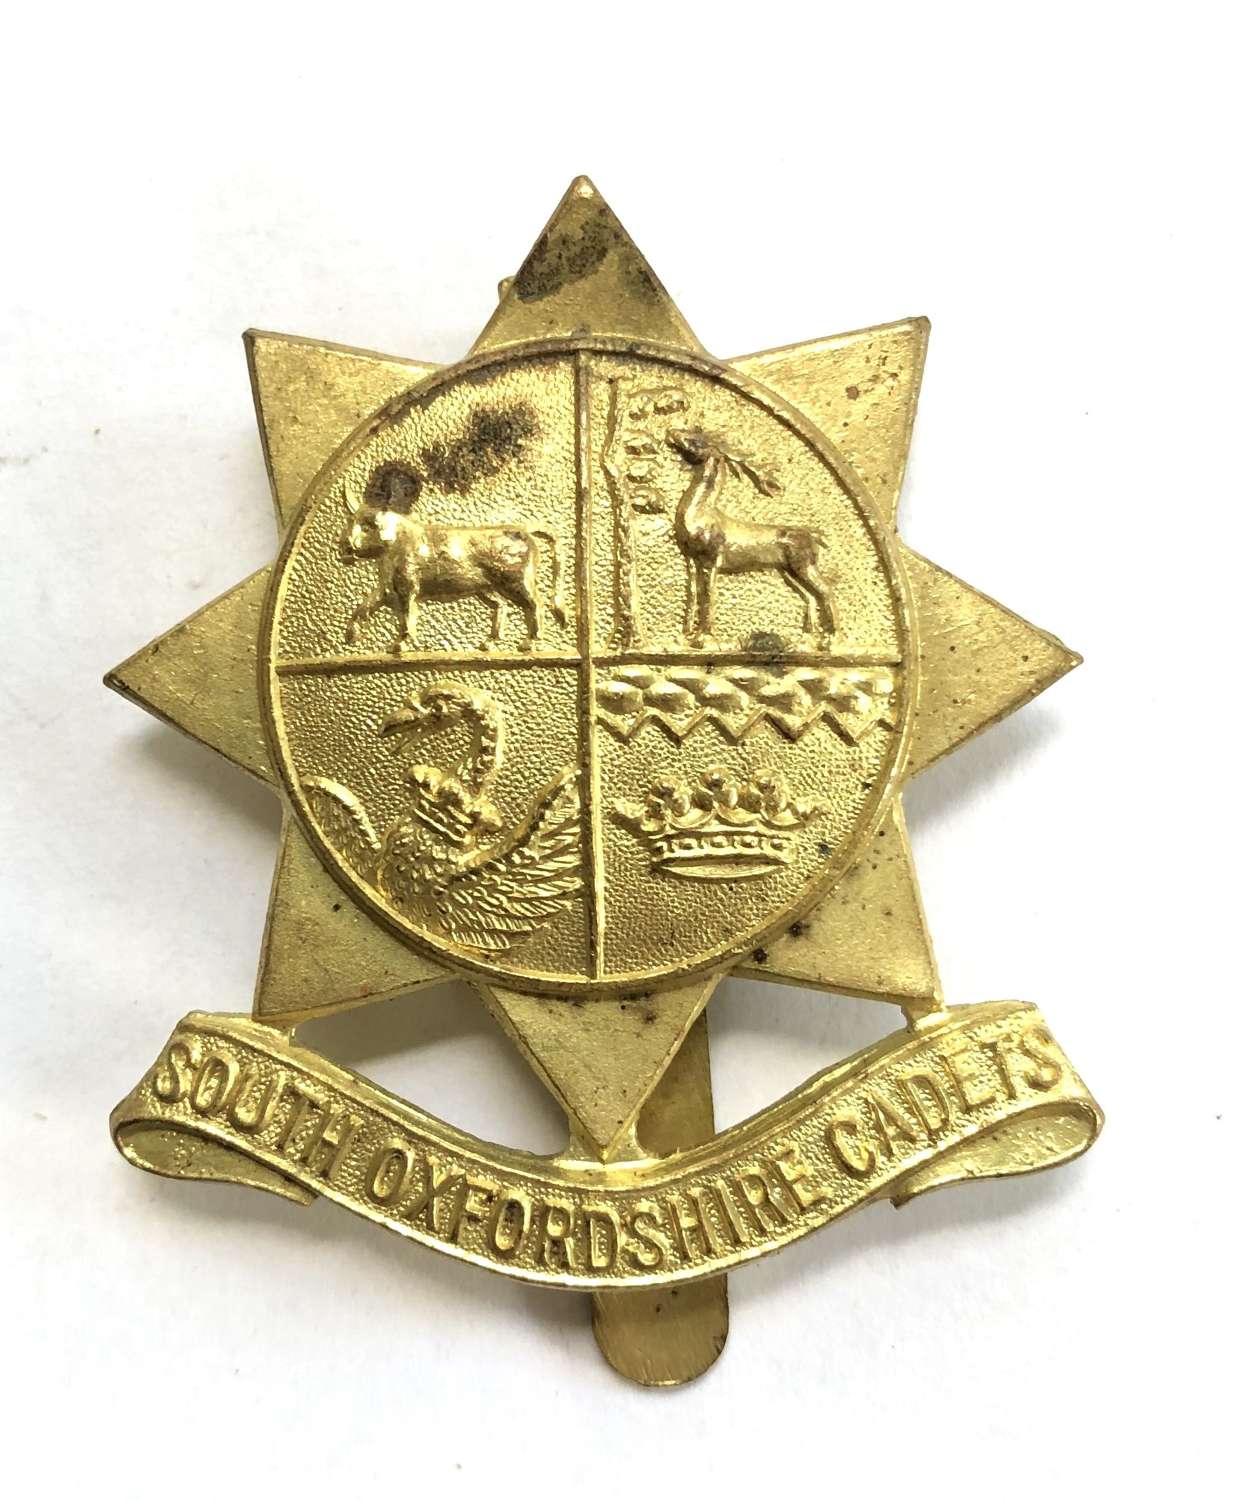 South Oxfordshire Cadets cap badge by J.R .Gaunt, London